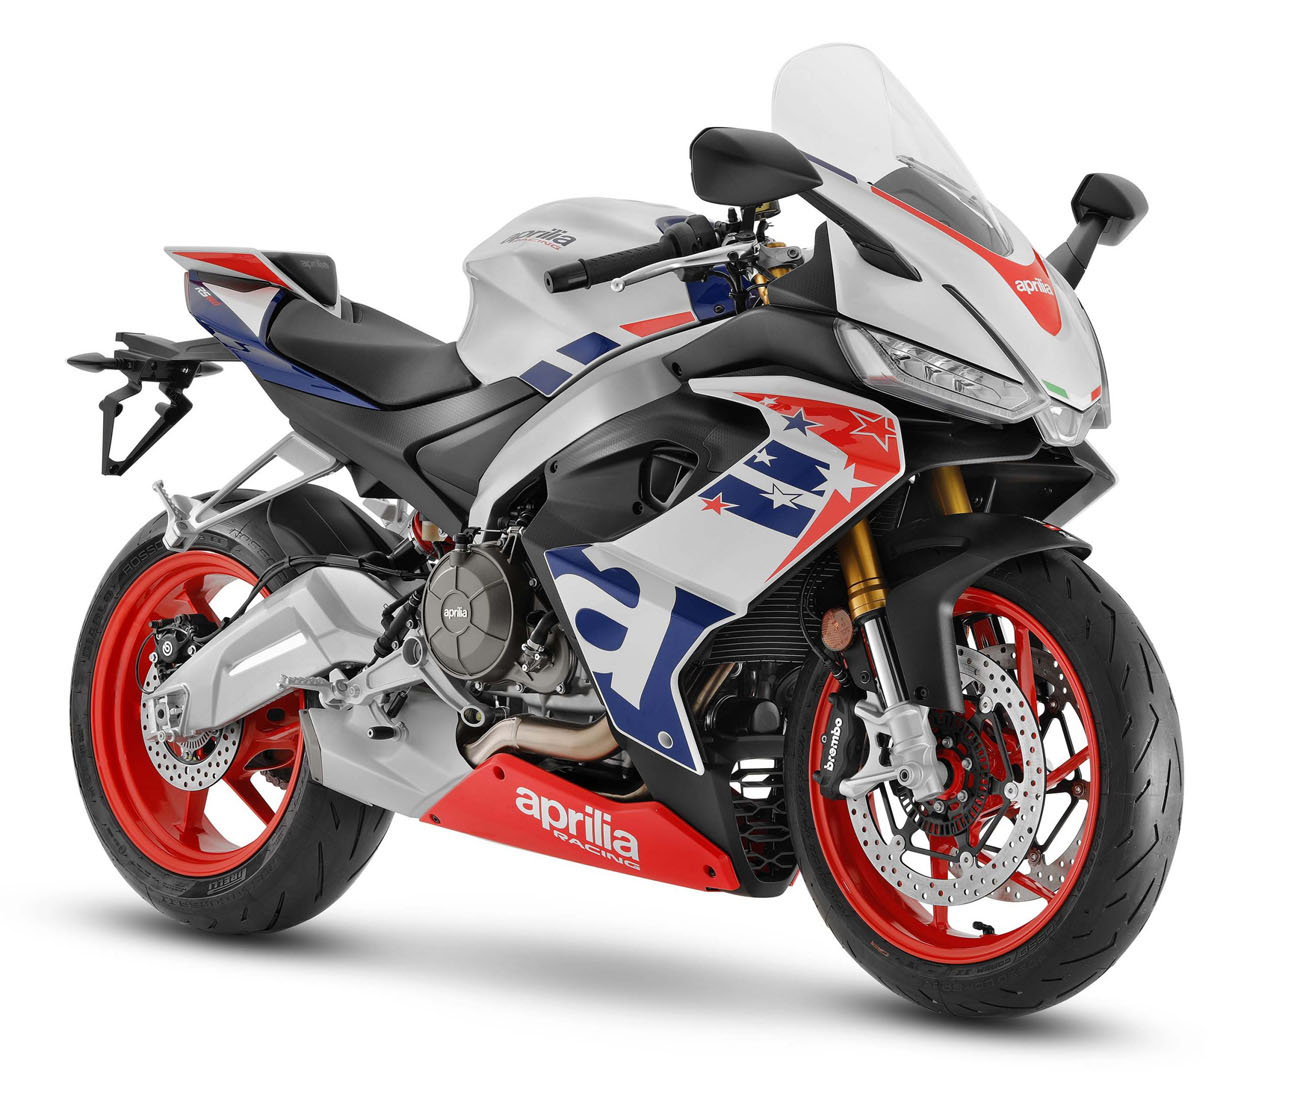 Aprilia RS 660 Stars and Stripes Limited Edition technical specifications